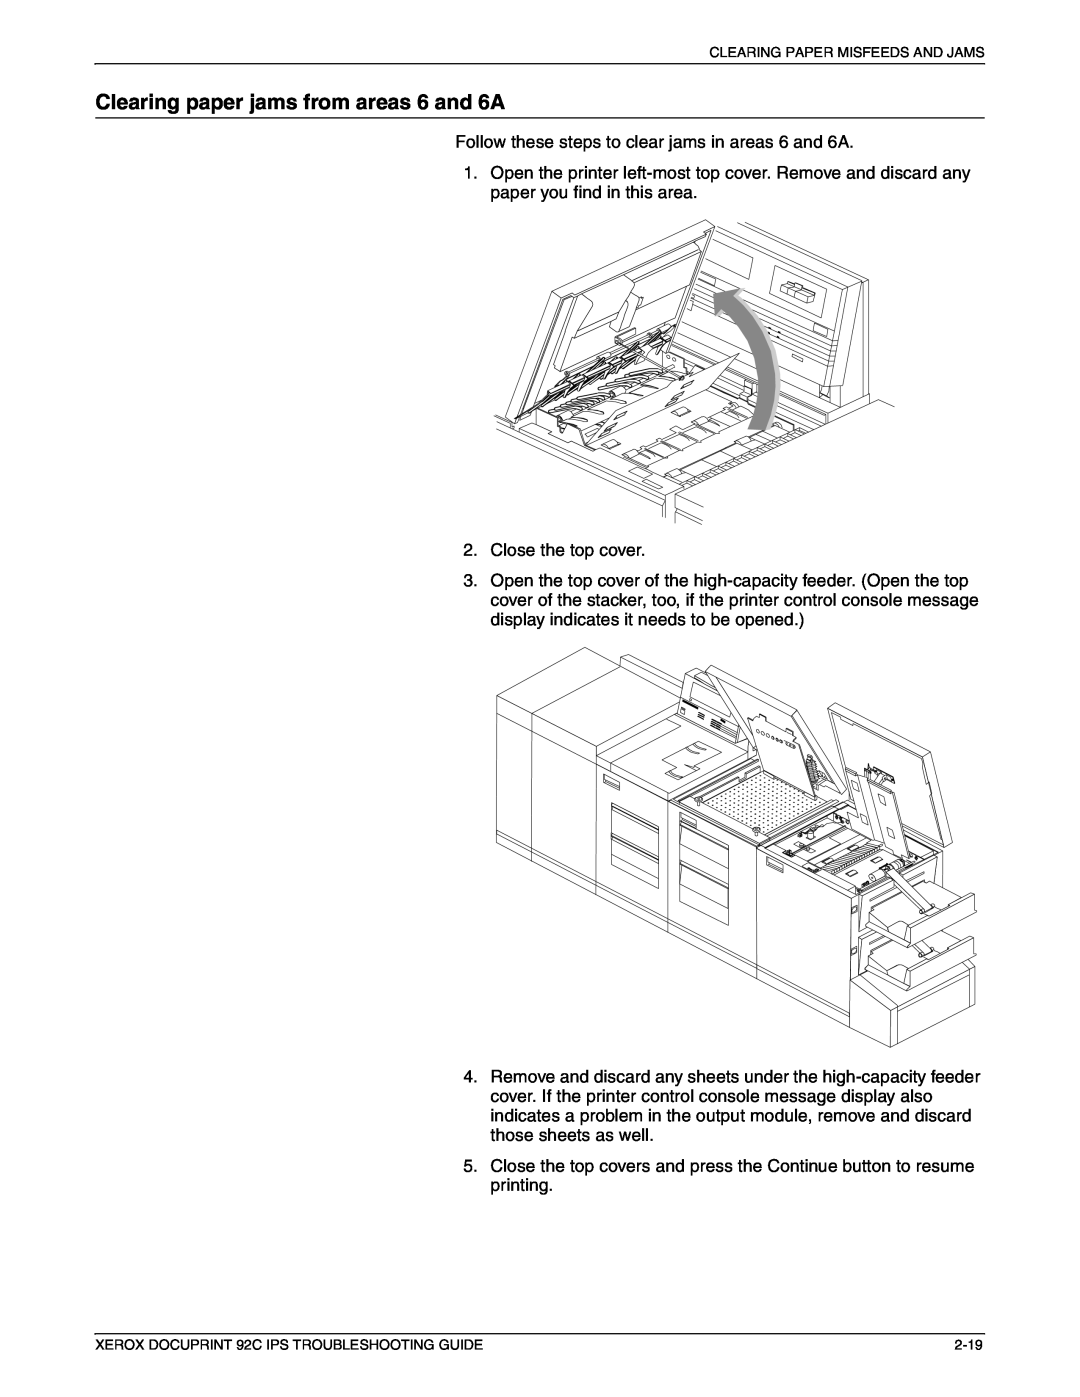 Xerox 92C IPS manual Clearing paper jams from areas 6 and 6A 